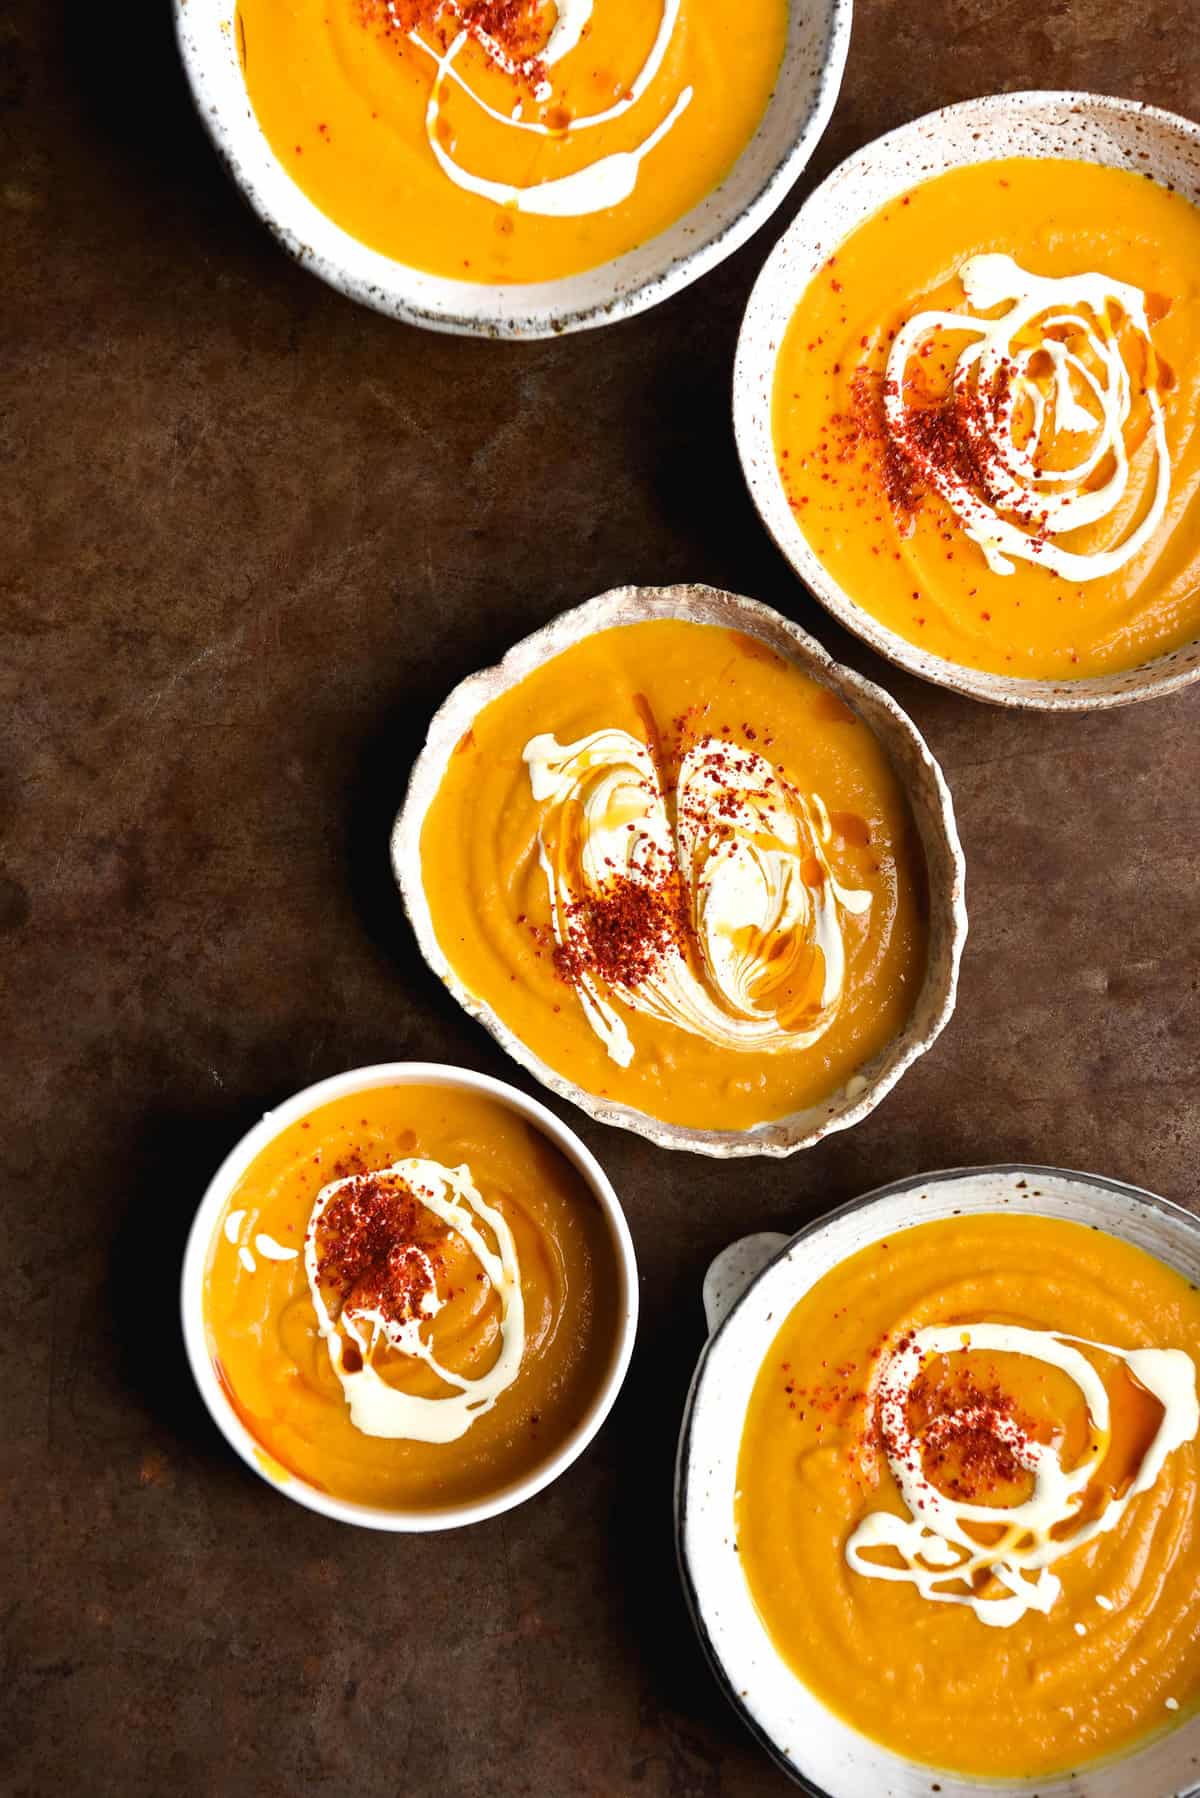 An aerial image of 5 ceramic white bowls filled with pumpkin soup atop a rusty backdrop. The soup bowls are topped with swirls of cream and chilli flakes. 